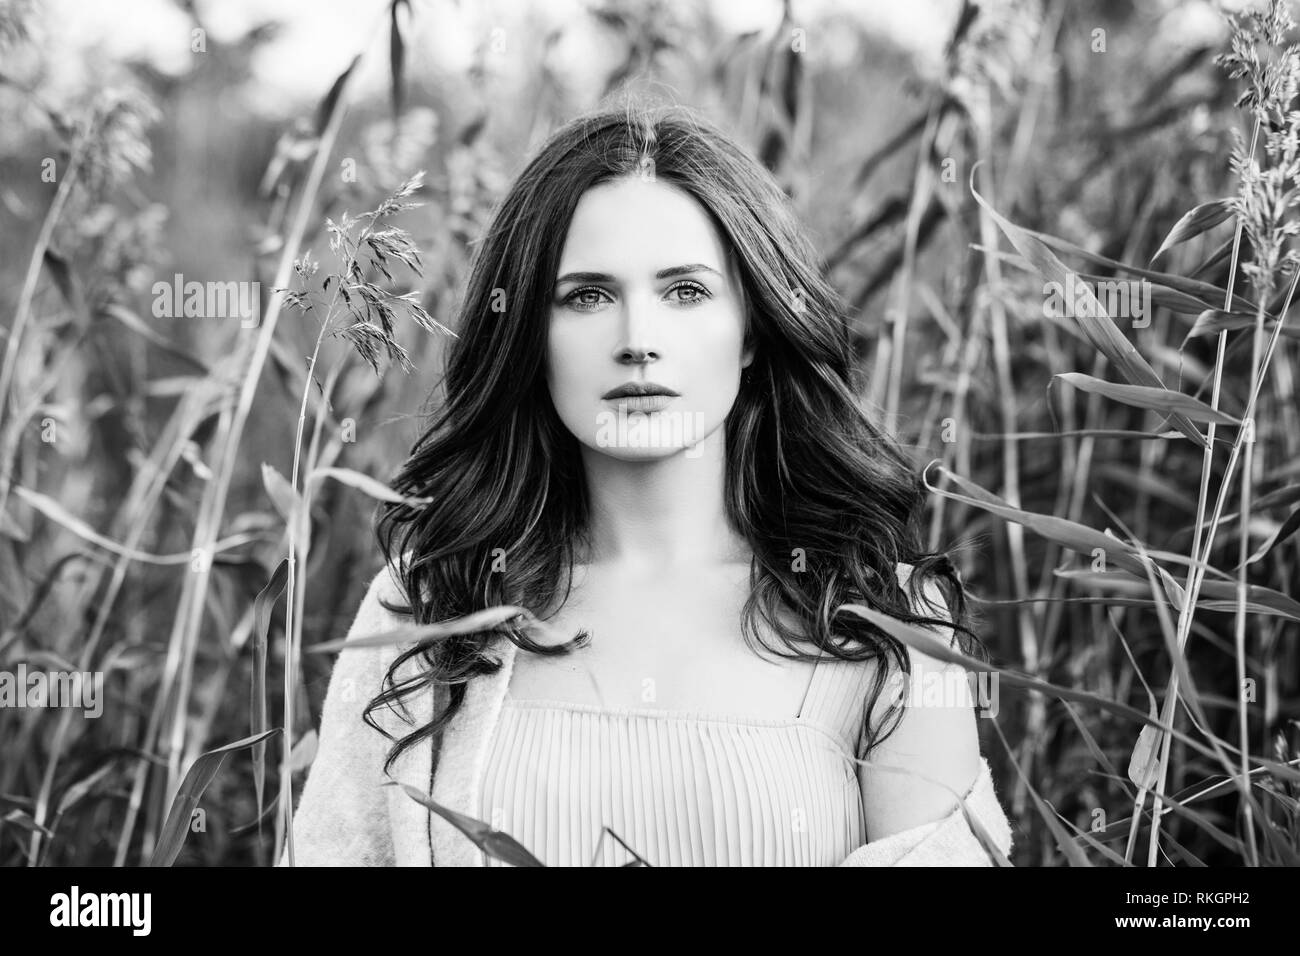 Young woman black and white portrait Stock Photo